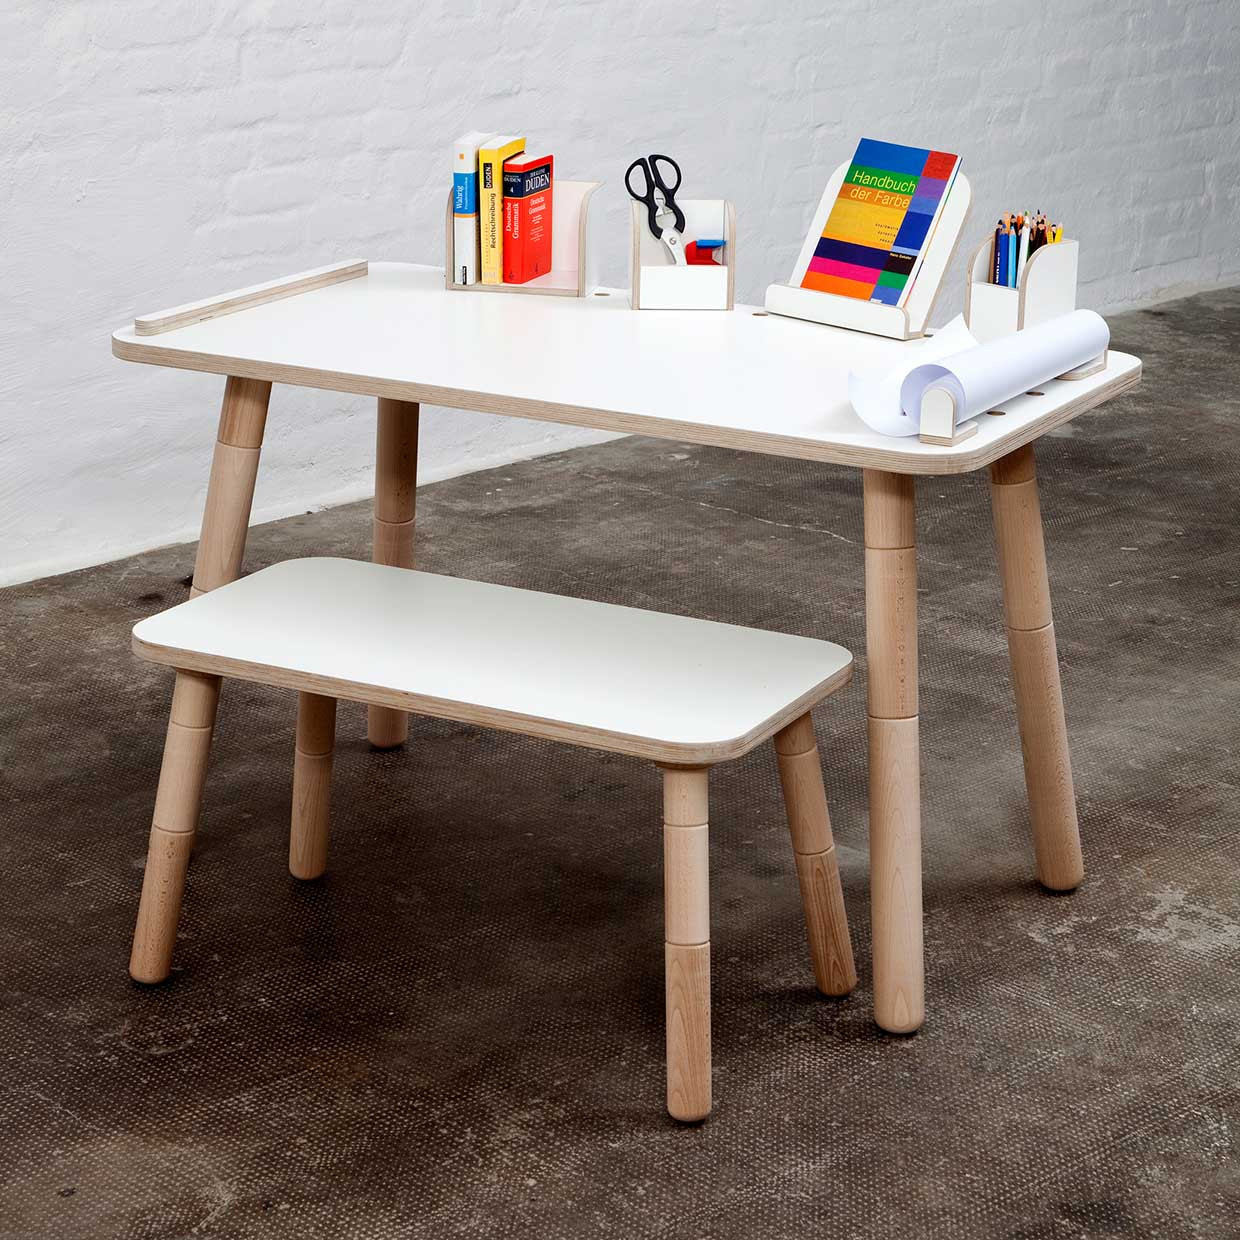 Kids Desk Table Awesome Growing Table – Desk for Children that Grows by Pure Position